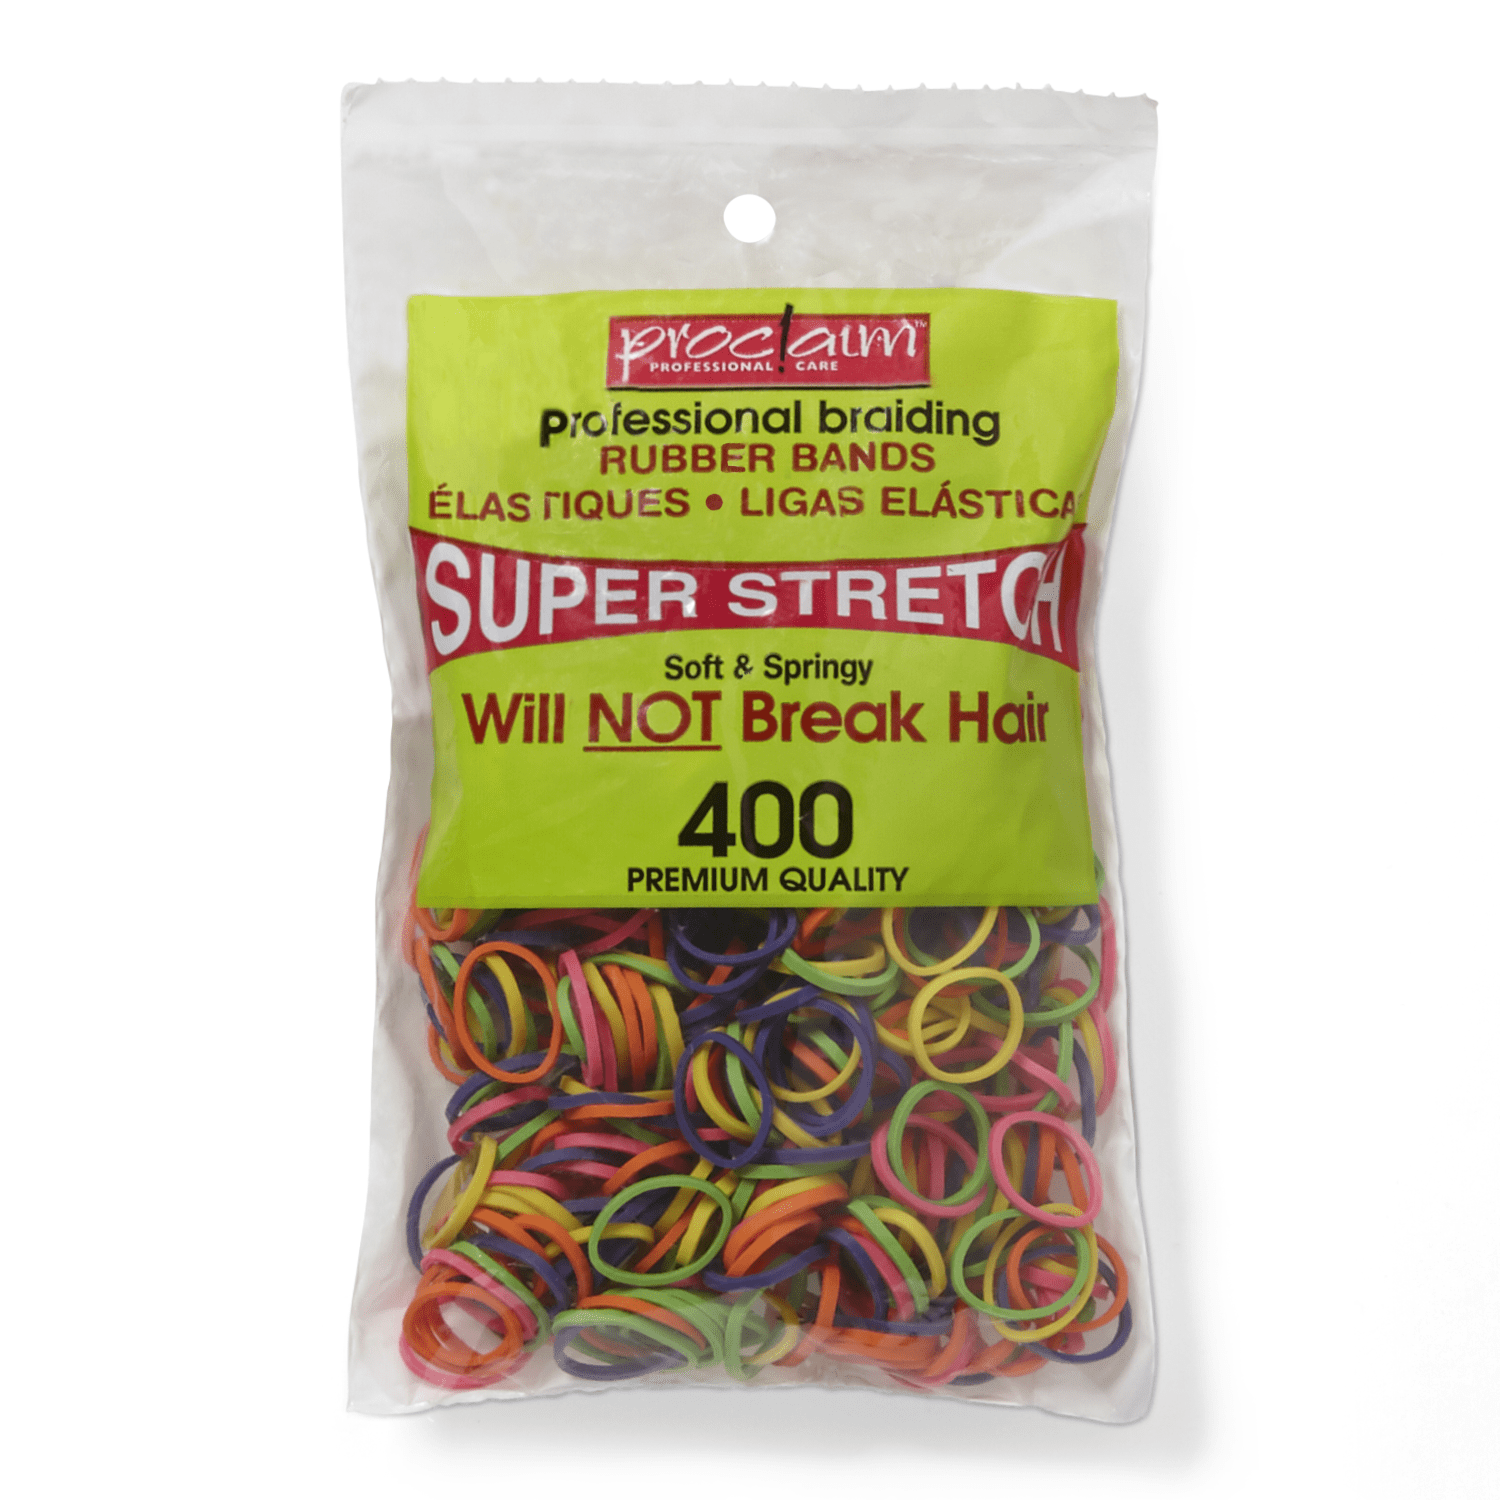 Activave Round Ball Rubber Band Elastics 150g Colorful Rubber